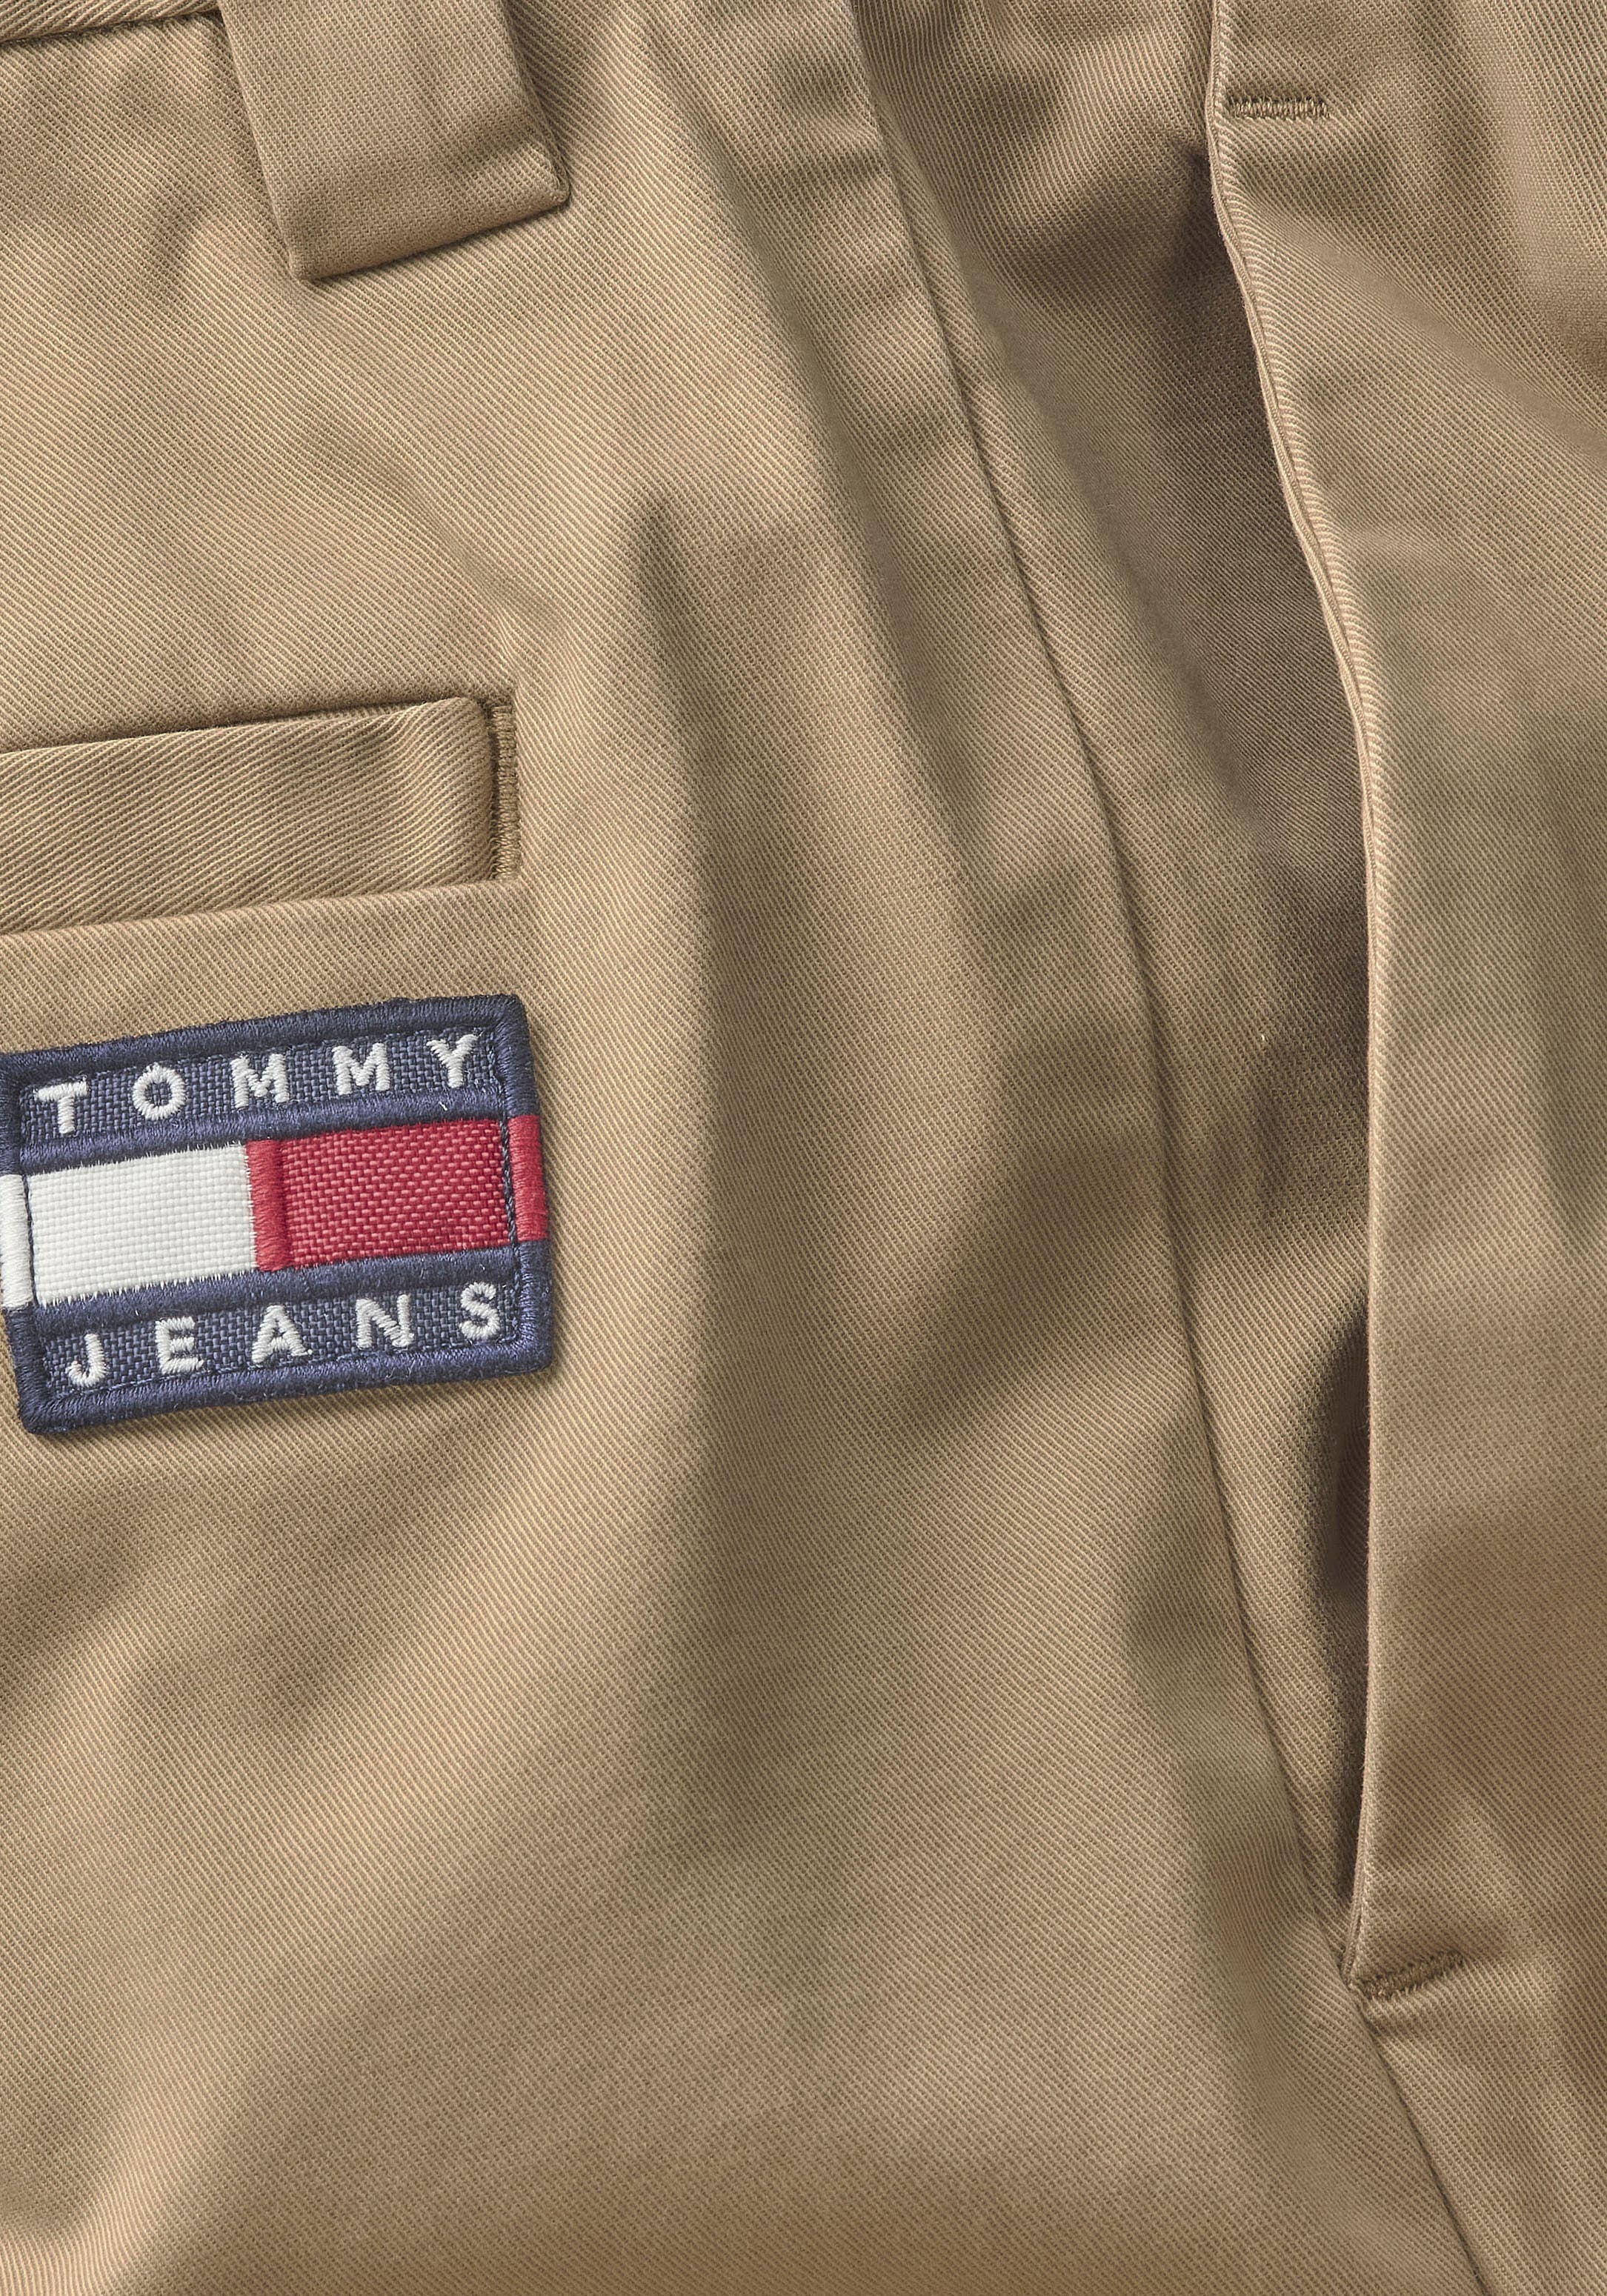 Tommy Jeans Chinohose shoppen OTTO »TJM CHINO«, Label-Badge mit online bei DAD